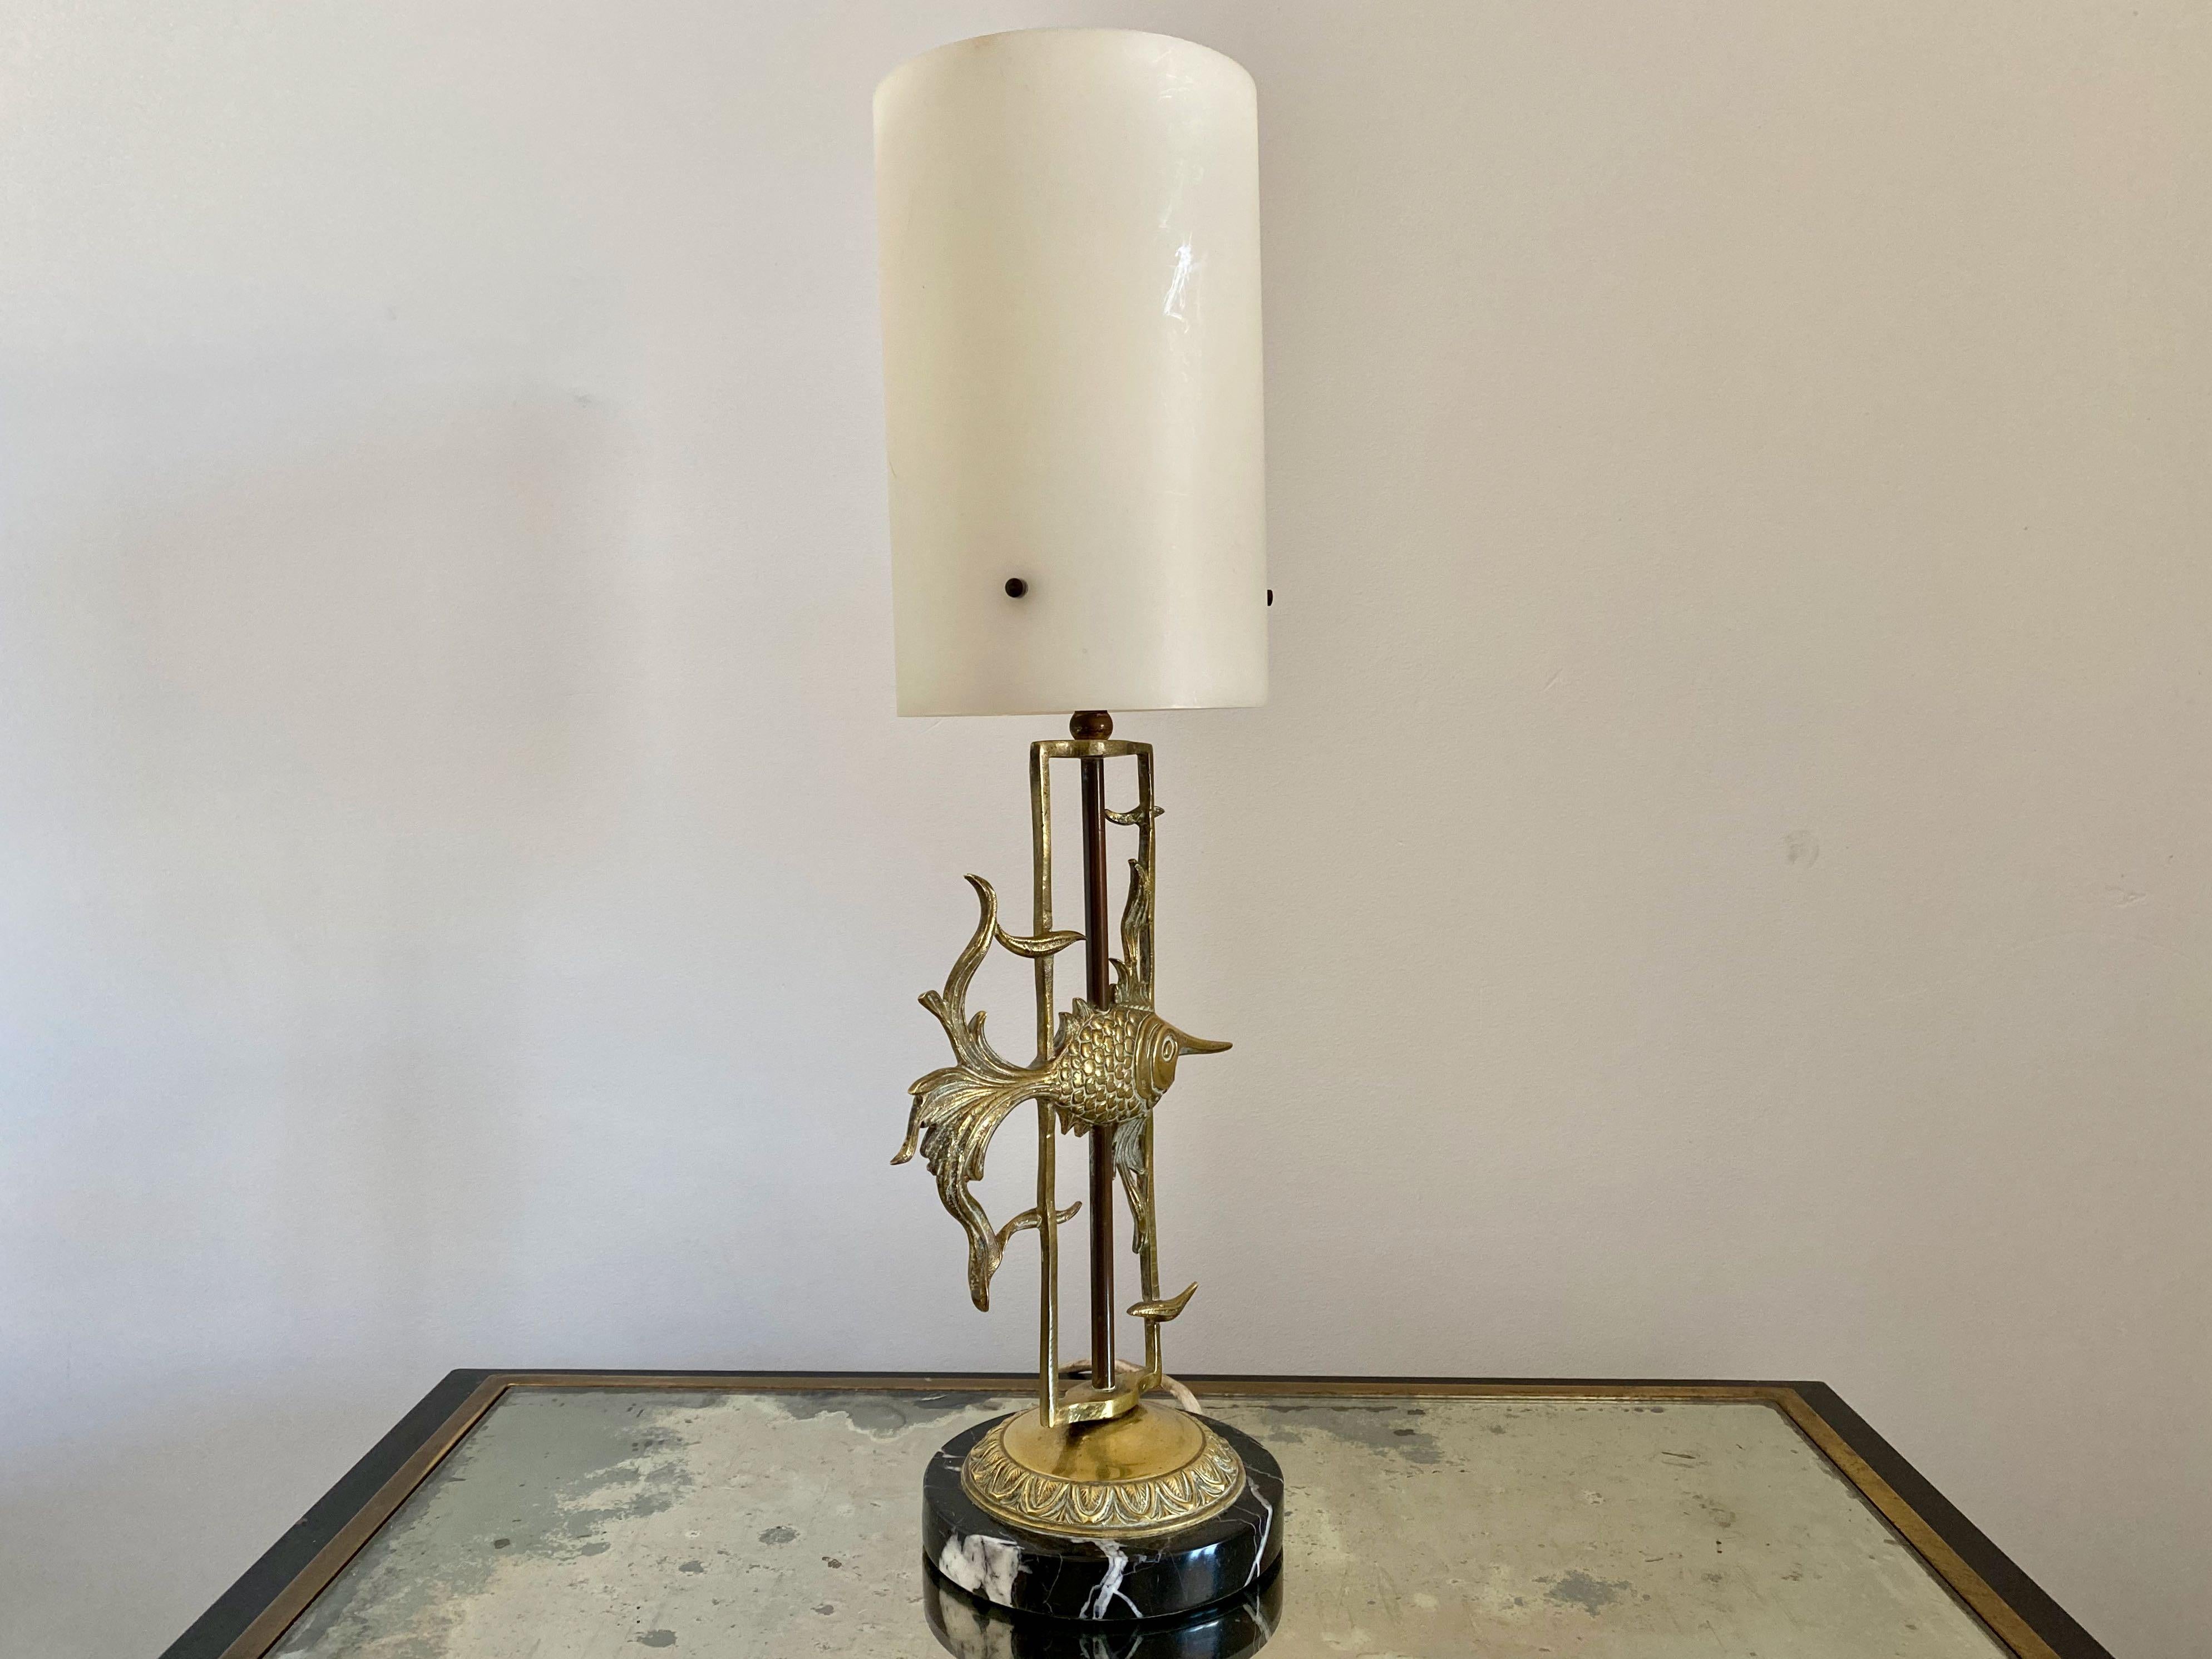 Fish lamp

Brass

Marble base

White plastic shade,

France, 1950s.